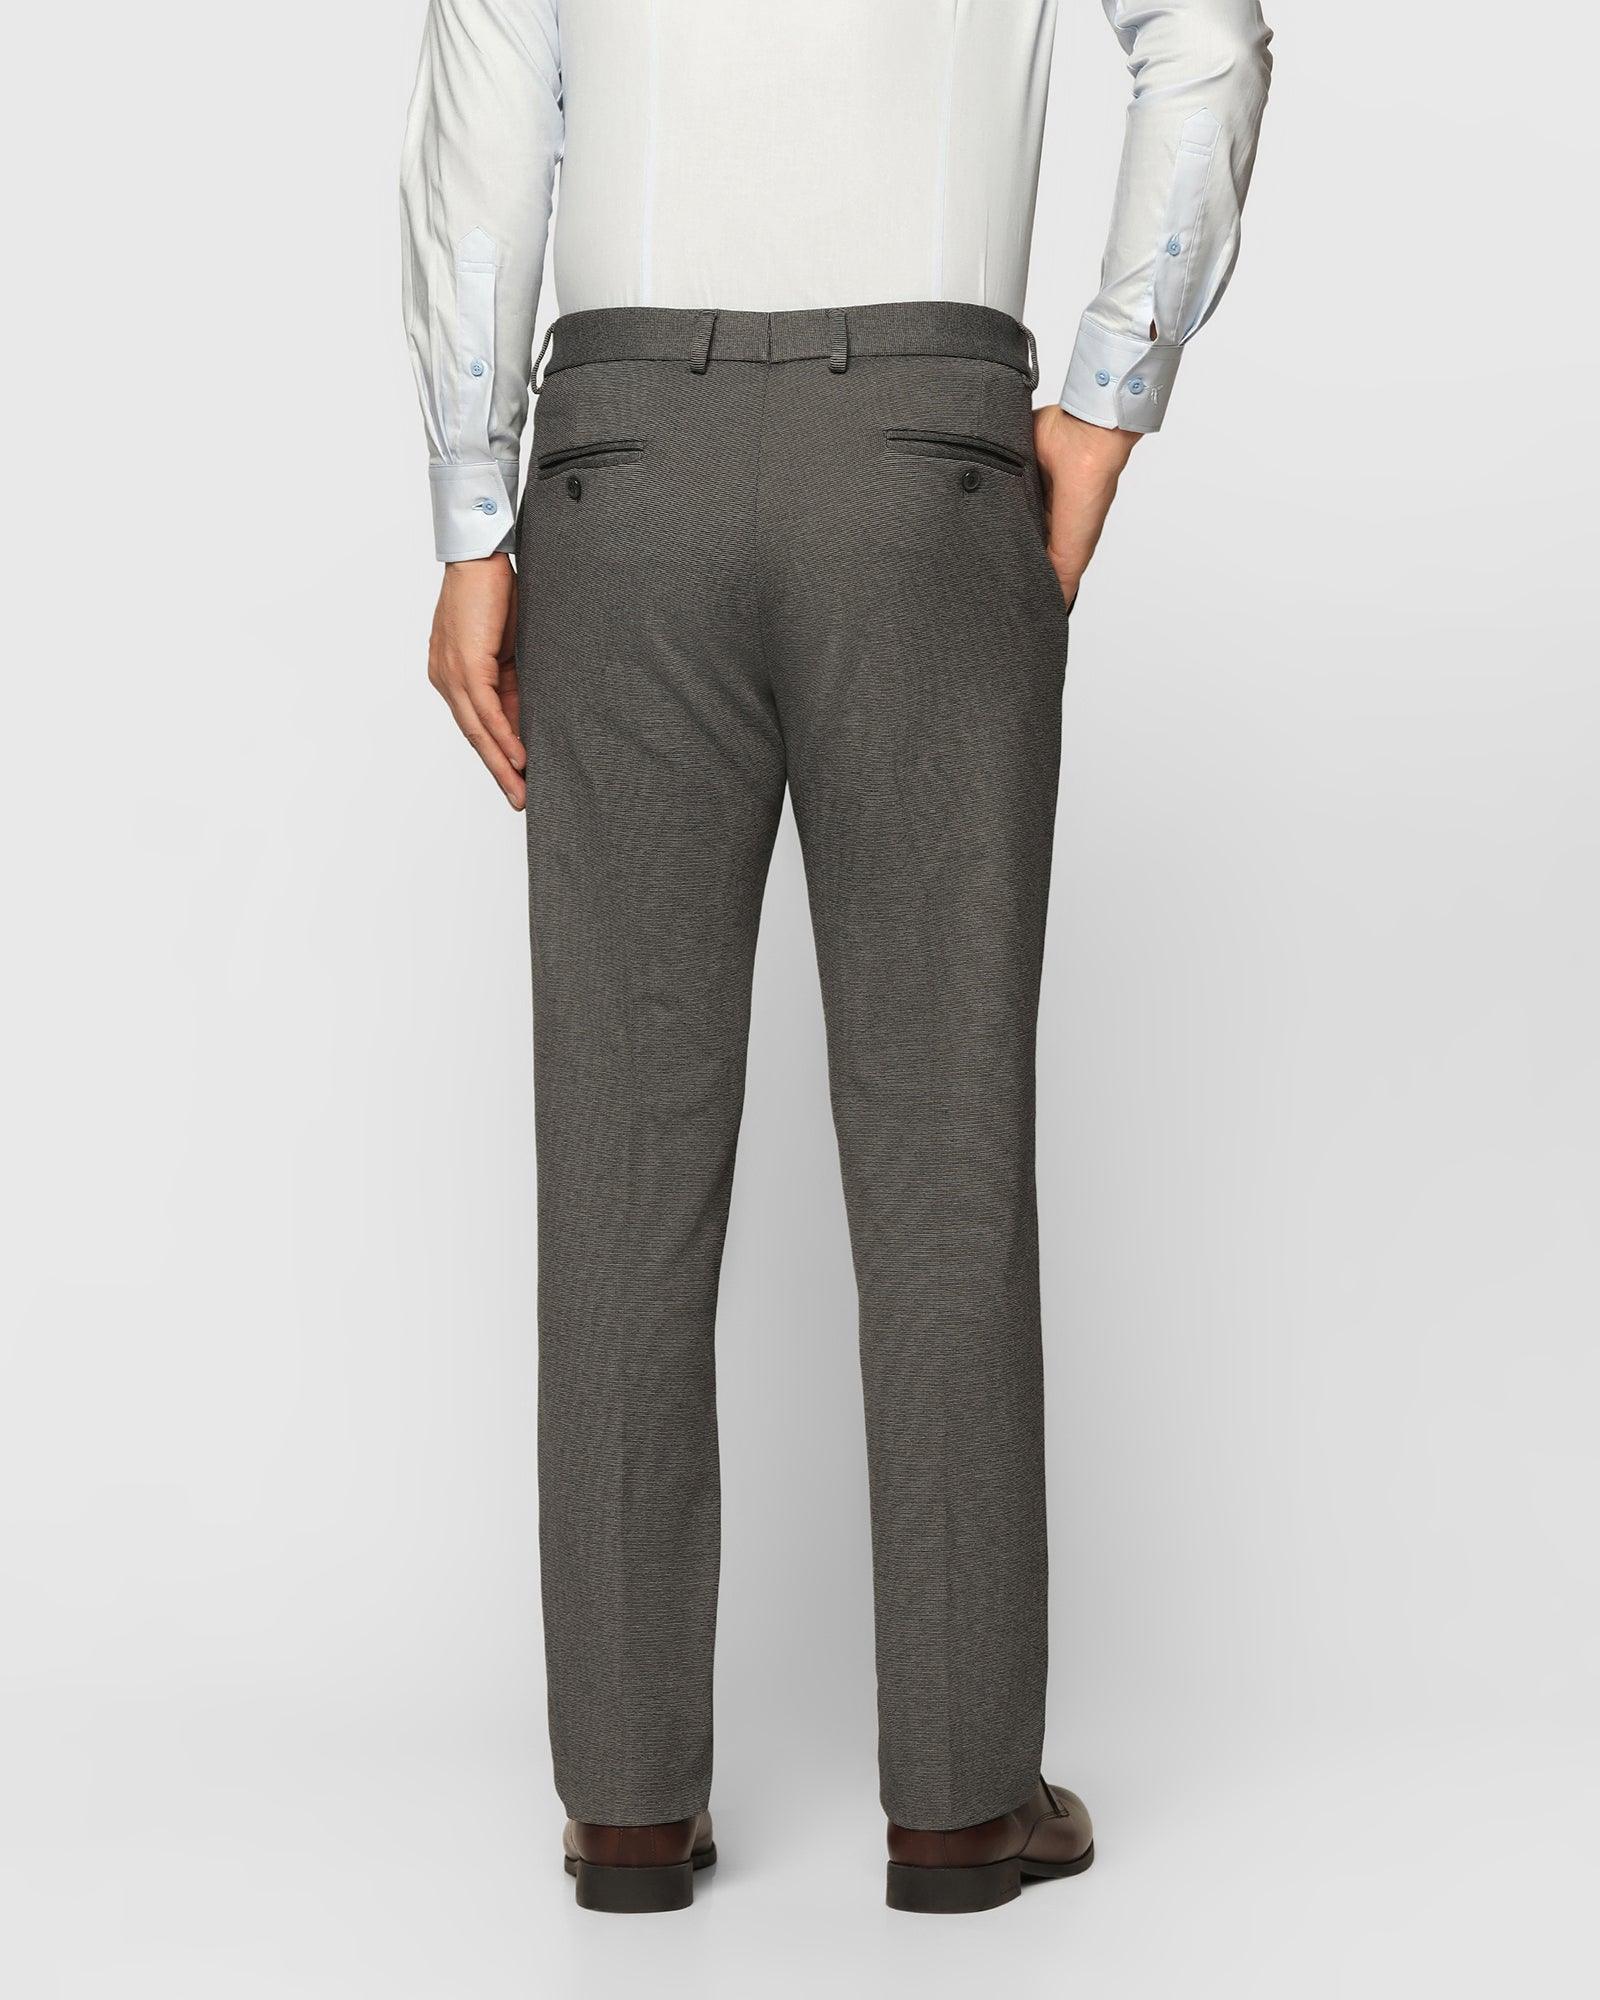 Textured Wool Look Mid Waist Solid Pocket Trousers - Cider